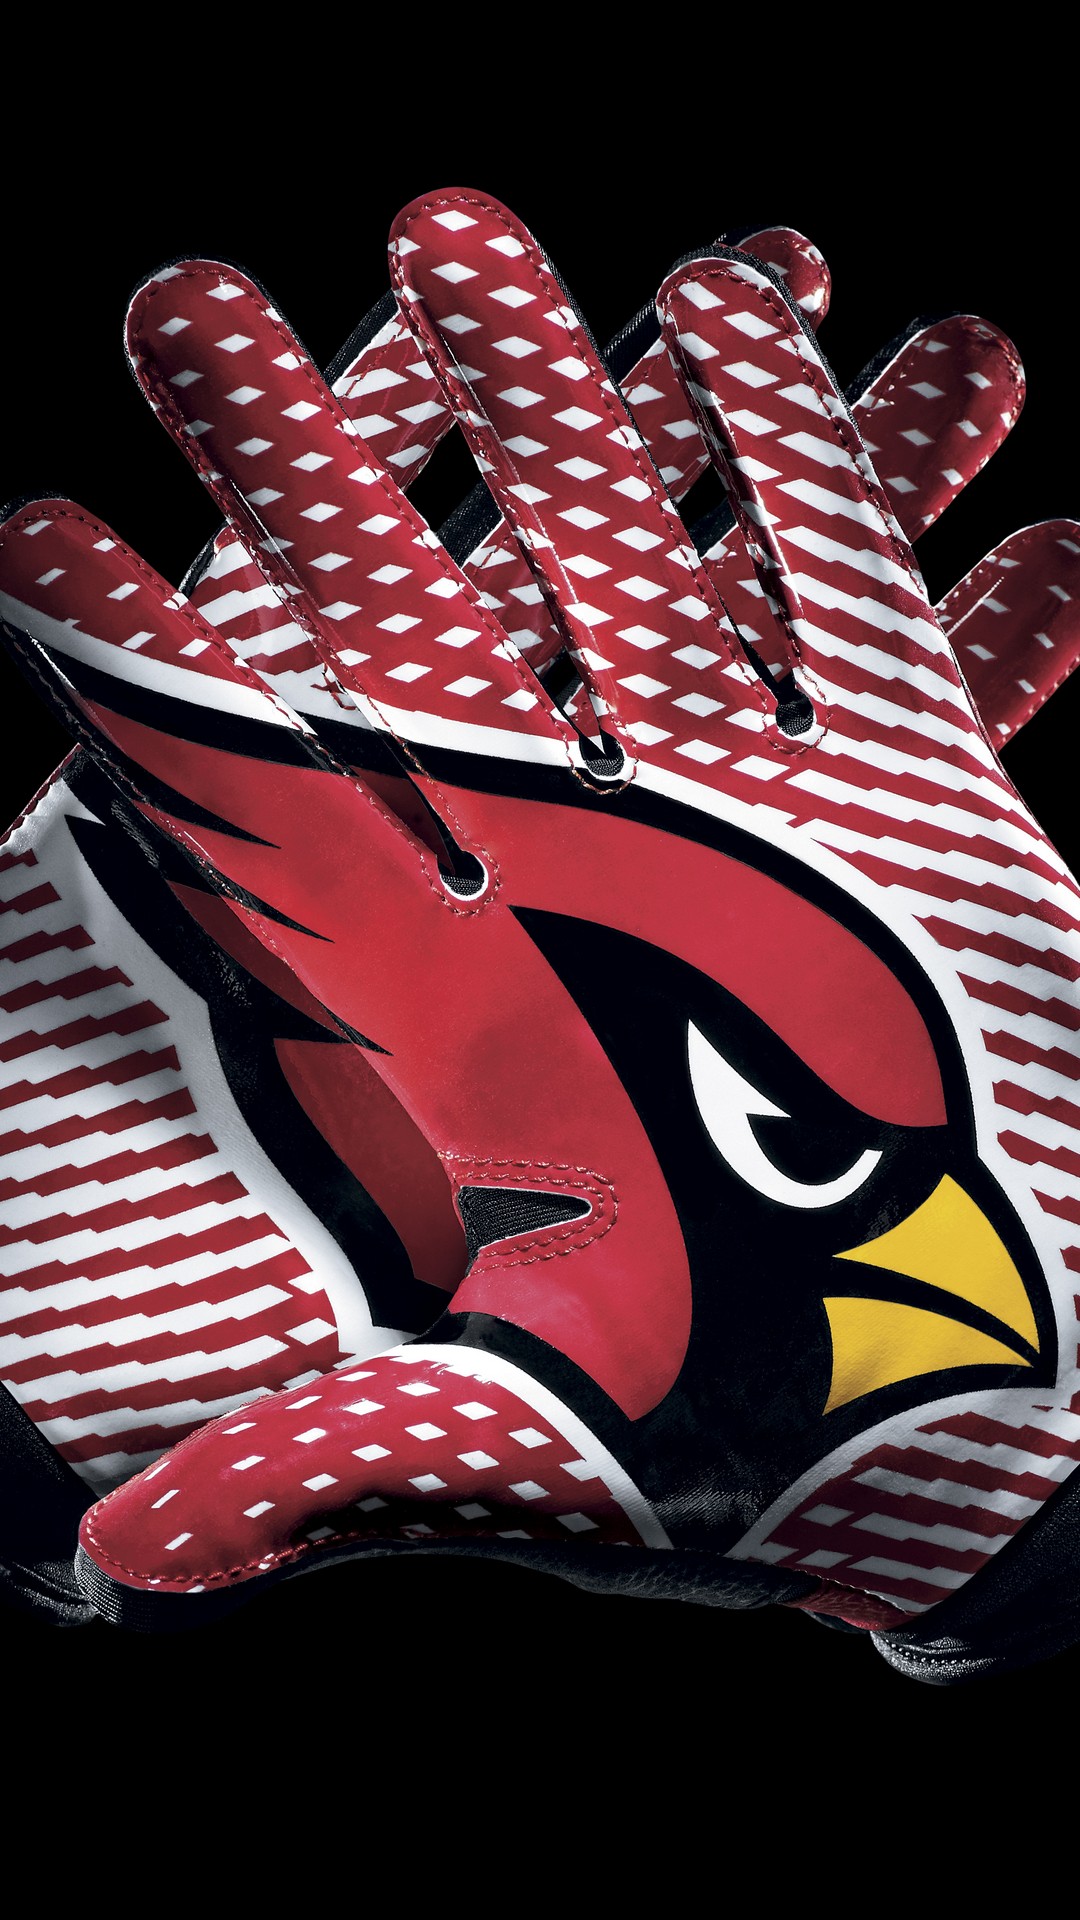 Arizona Cardinals iPhone X Wallpaper With high-resolution 1080X1920 pixel. Download and set as wallpaper for Apple iPhone X, XS Max, XR, 8, 7, 6, SE, iPad, Android